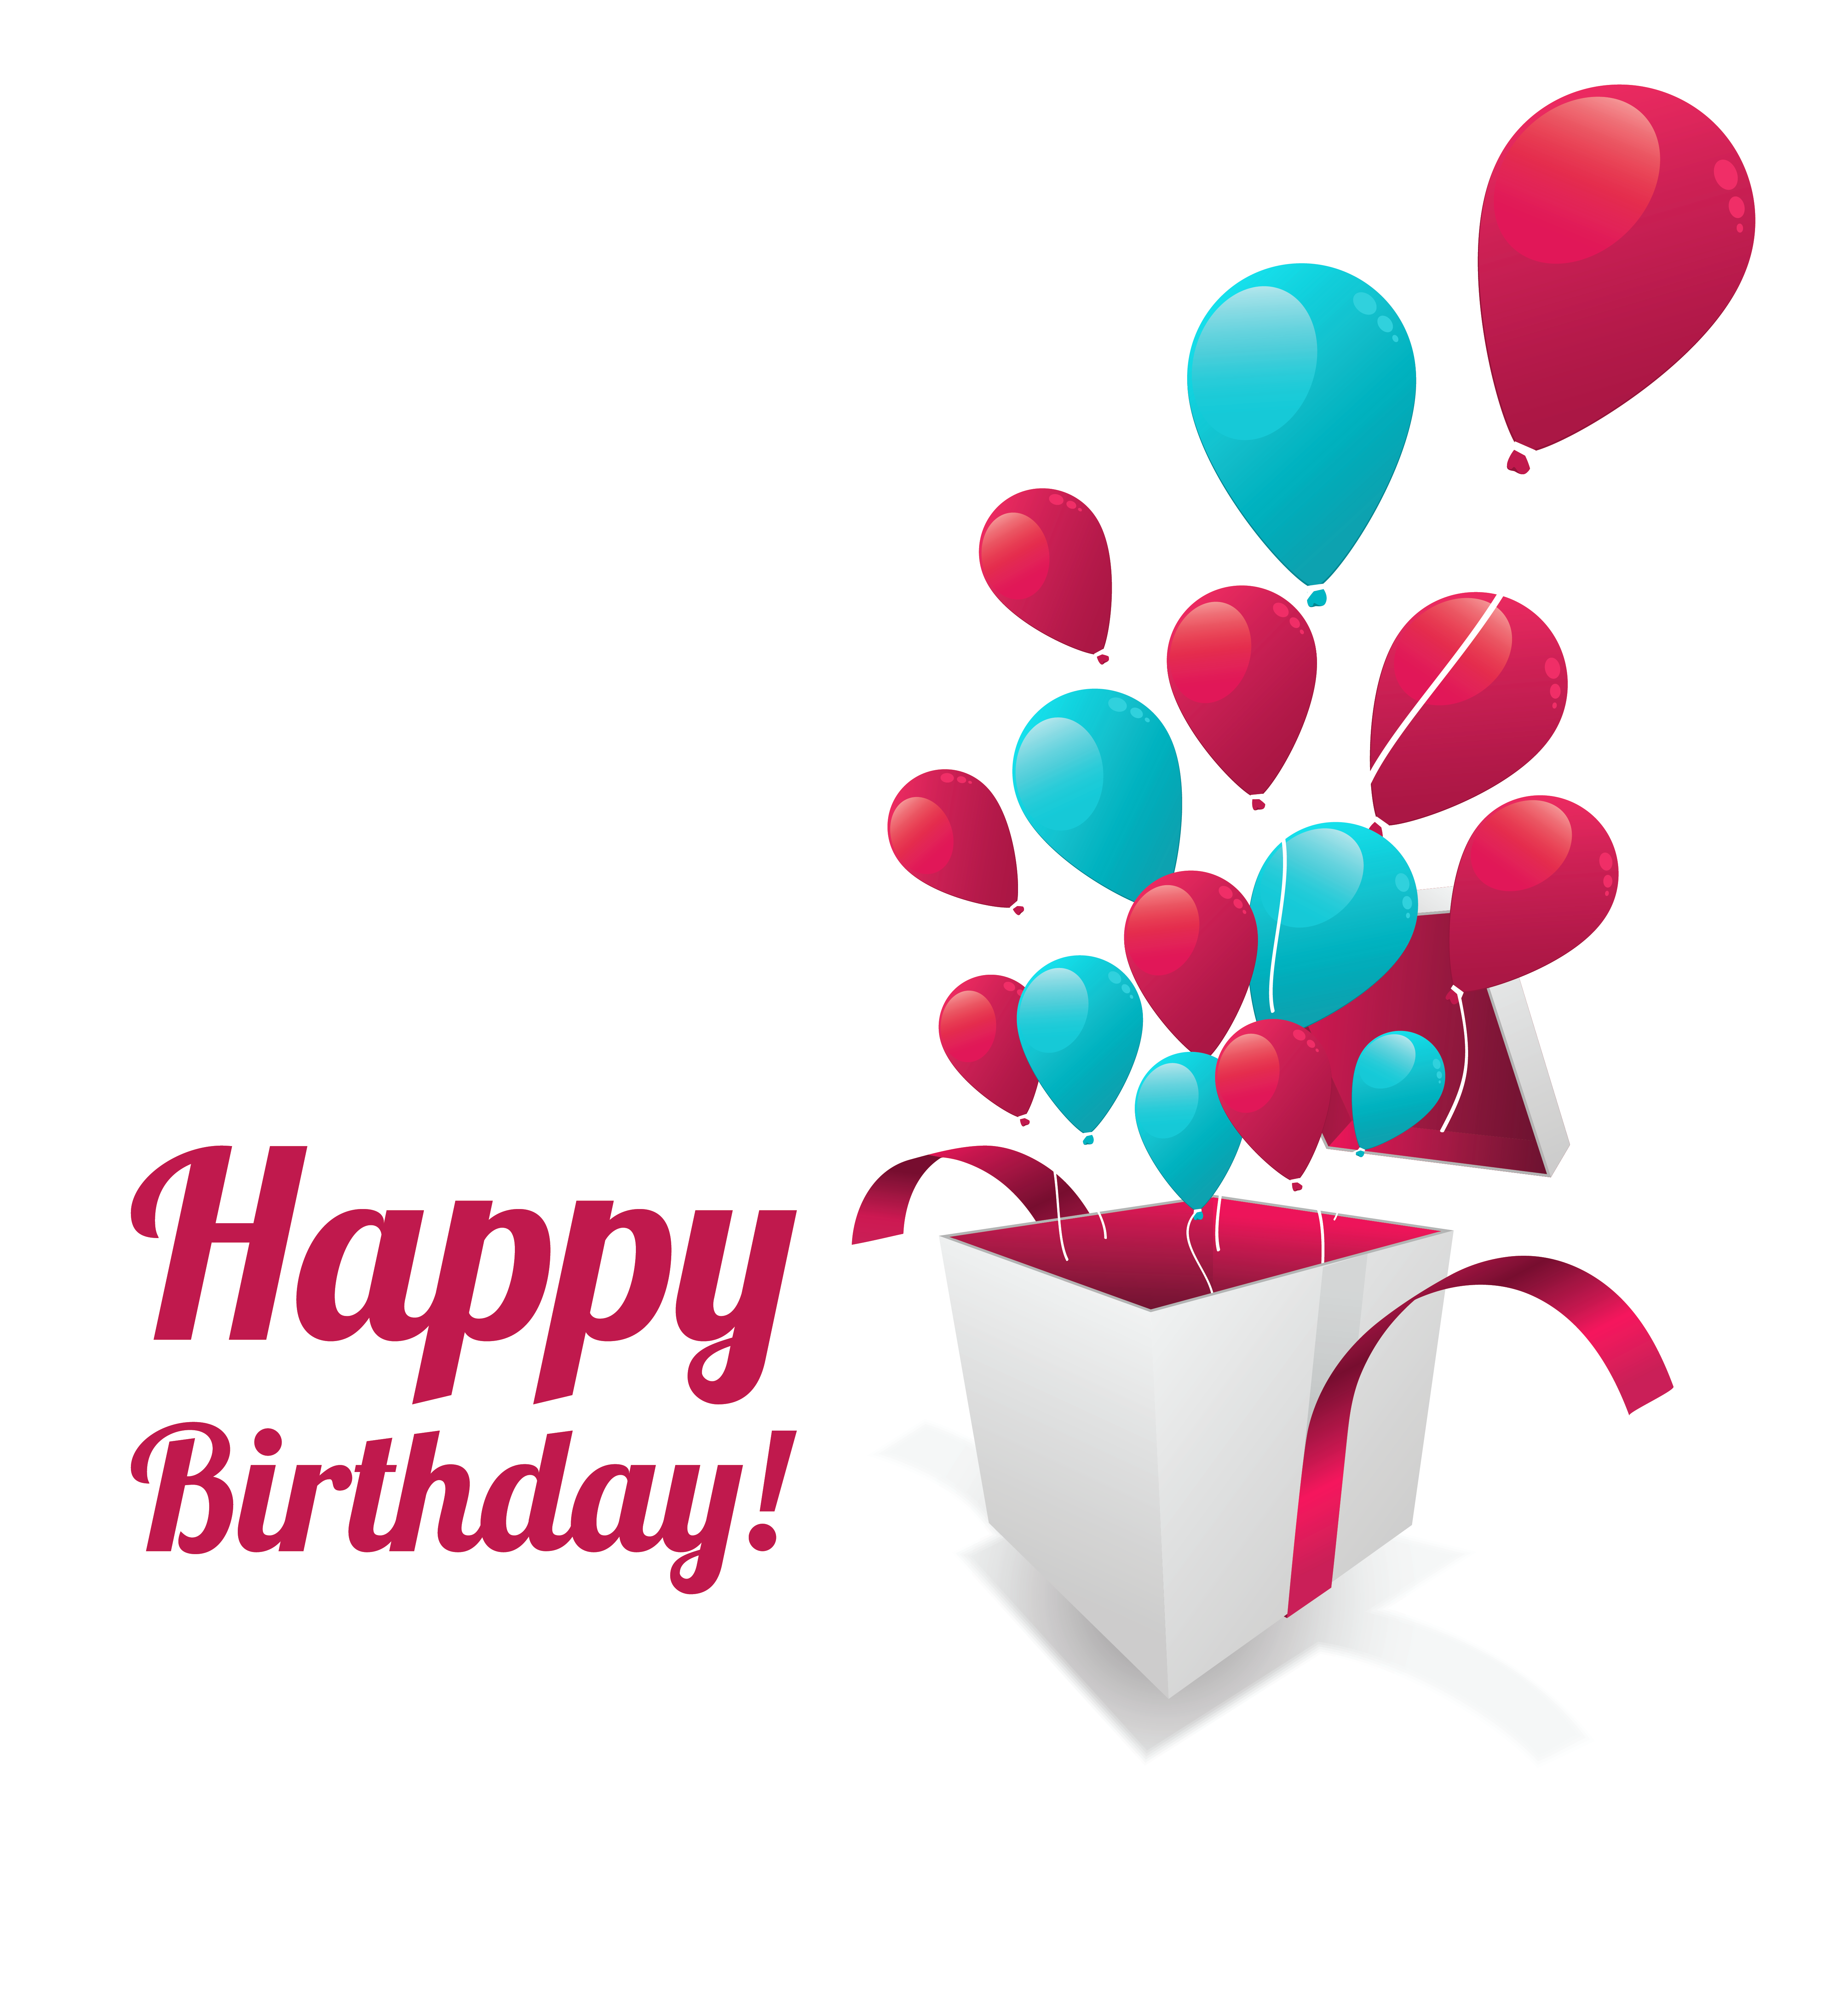 Happy Birthday Text Sticker Png Clipart Picture Gallery Yopriceville High Quality Images And Transparent Png Free Clipart